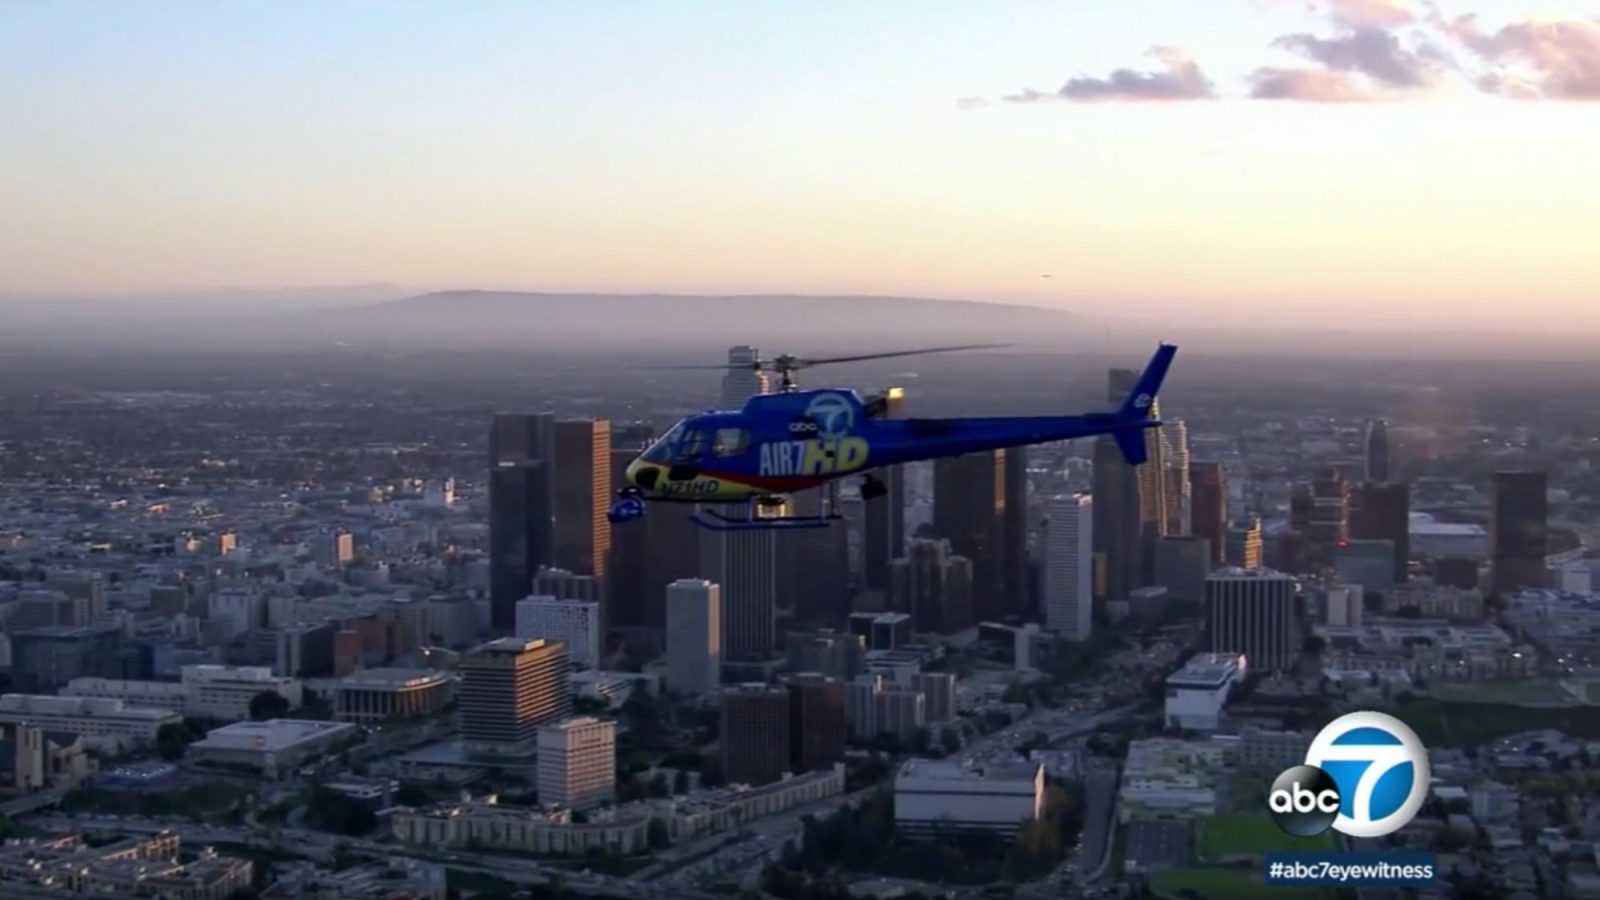 AIR7 HD struck by suspected drone over downtown LA, makes precautionary landing